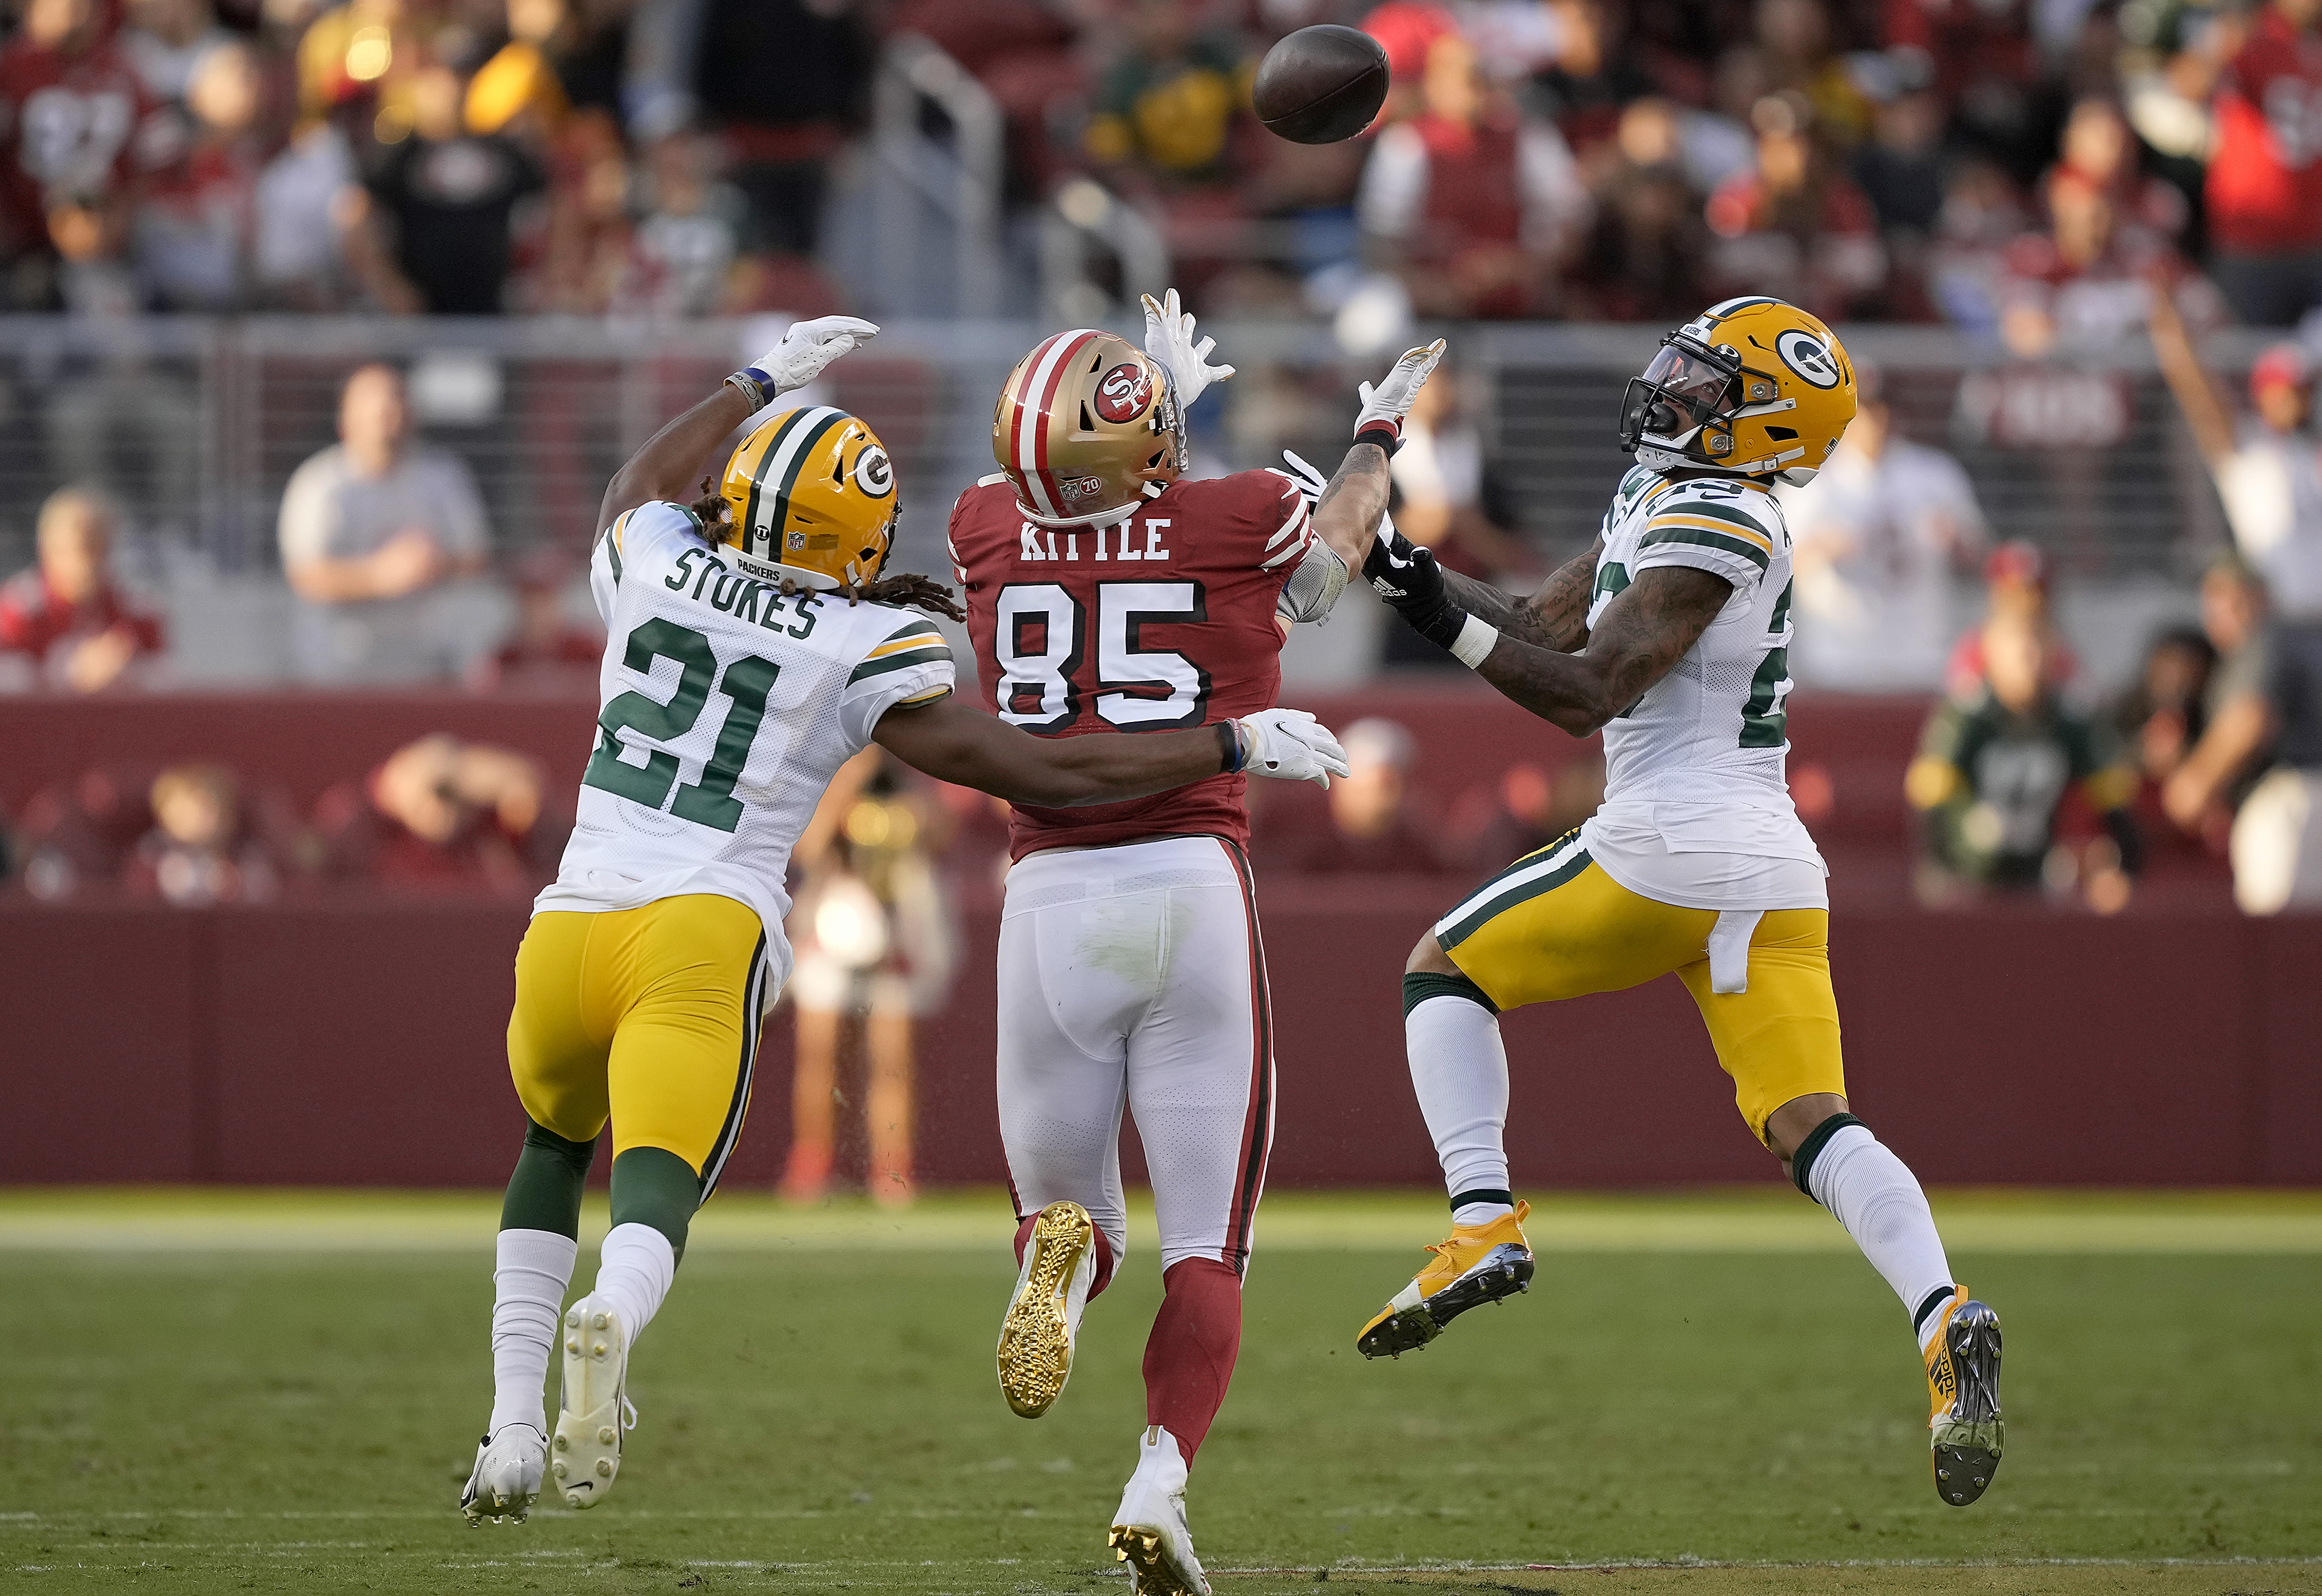 The 49ers have plenty of reasons to believe they can beat the Packers Saturday